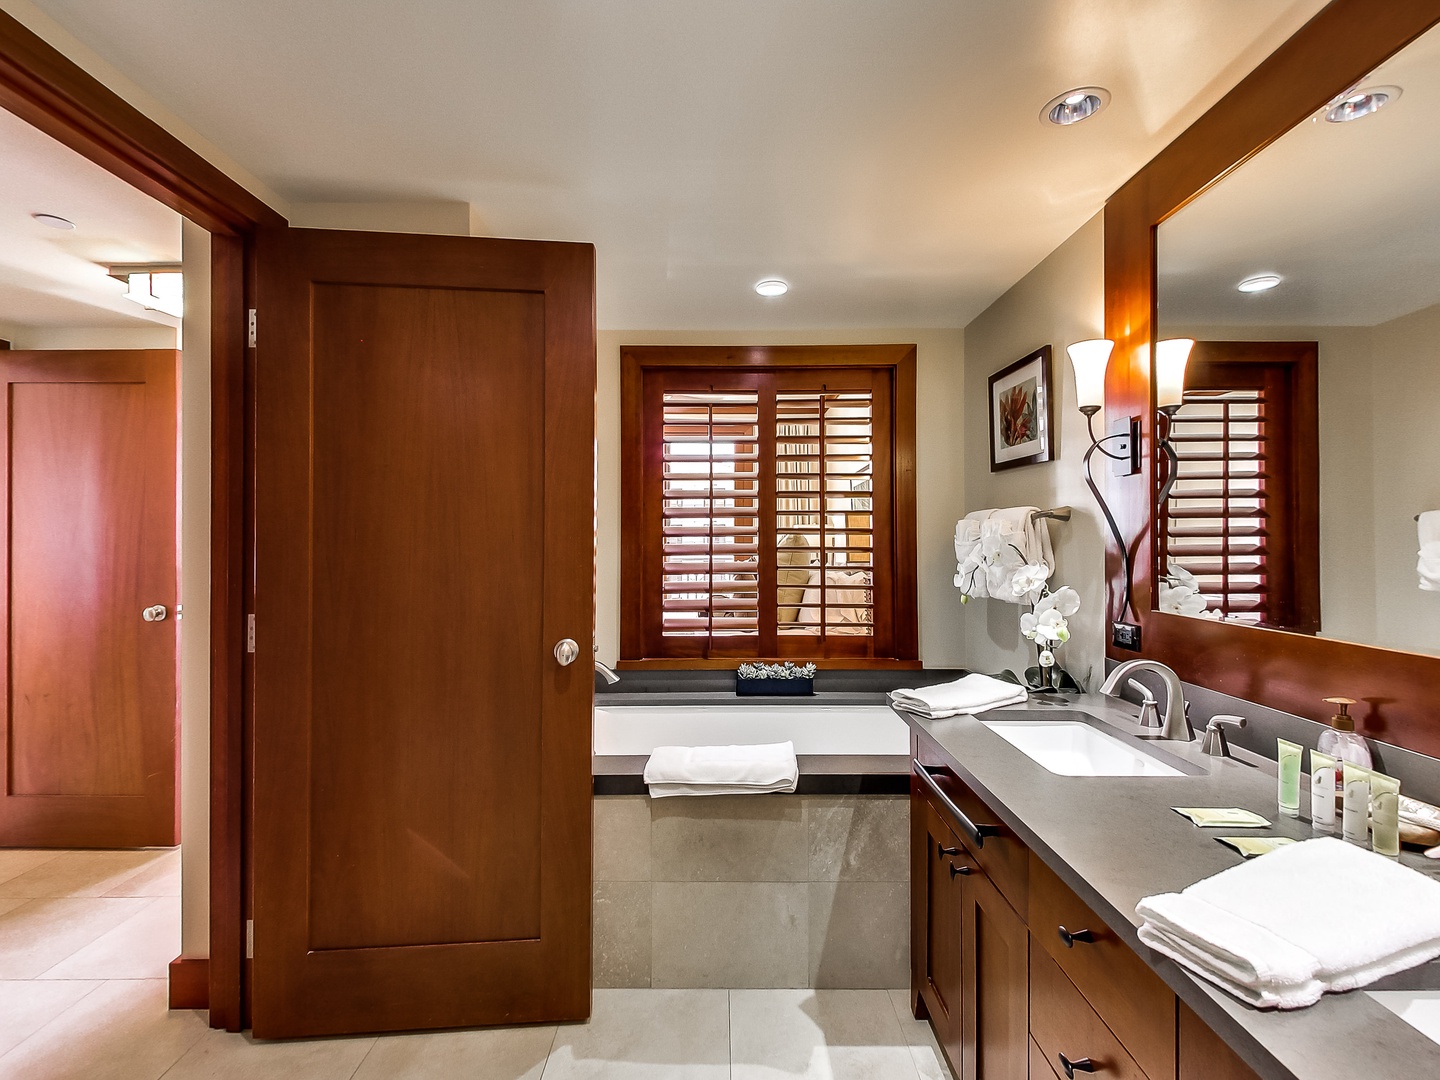 Kapolei Vacation Rentals, Ko Olina Beach Villas O1011 - The primary guest bathroom features a walk-in shower and luxurious soaking tub.